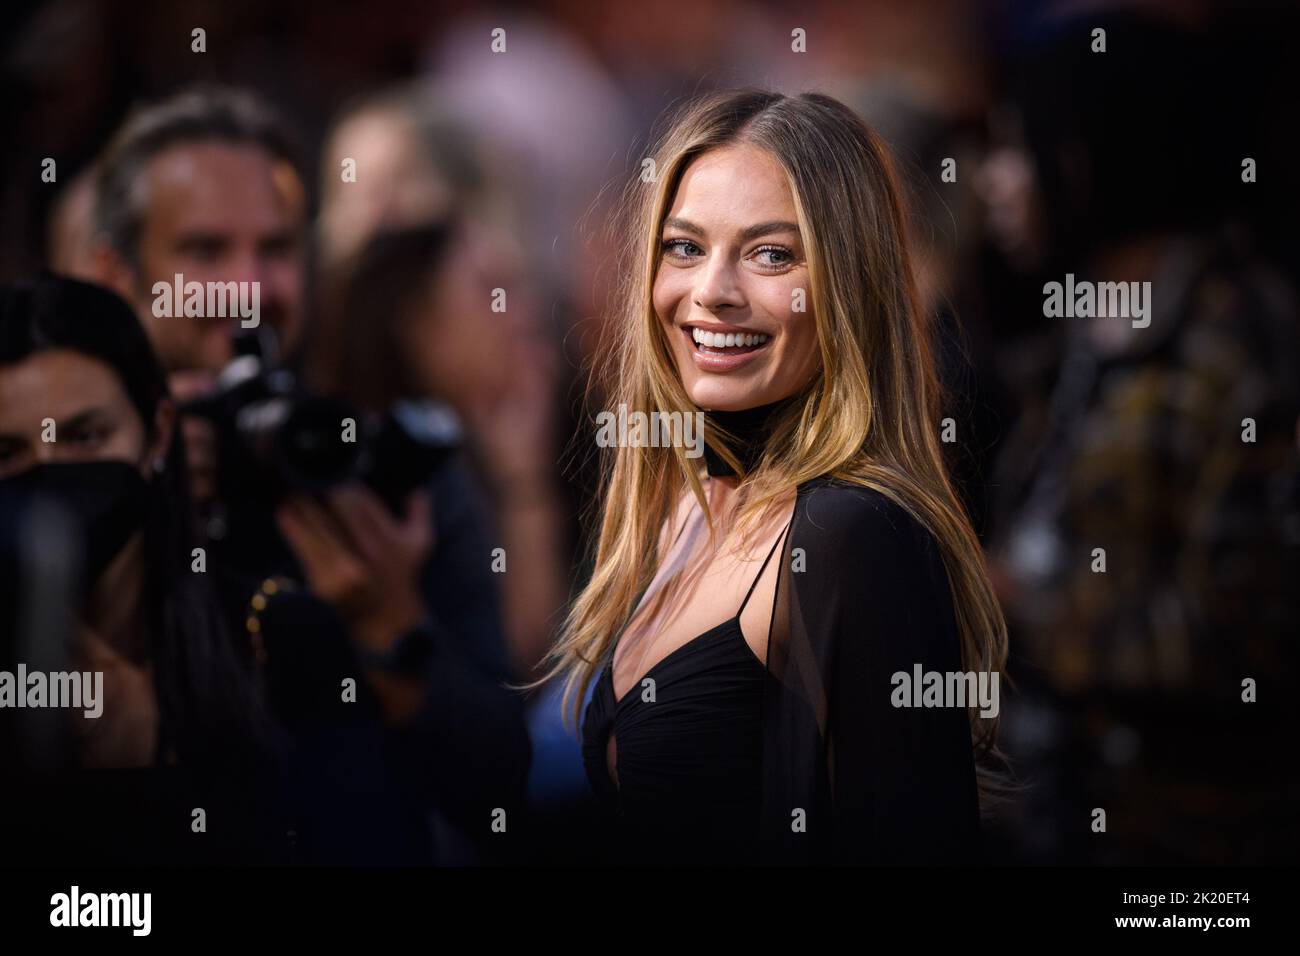 London, UK. 21 September 2022. Margot Robbie attending the European premiere of Amsterdam at the Odeon Luxe Leicester Square Cinema, London Picture date: Wednesday September 21, 2022. Photo credit should read: Matt Crossick/Empics/Alamy Live News Stock Photo